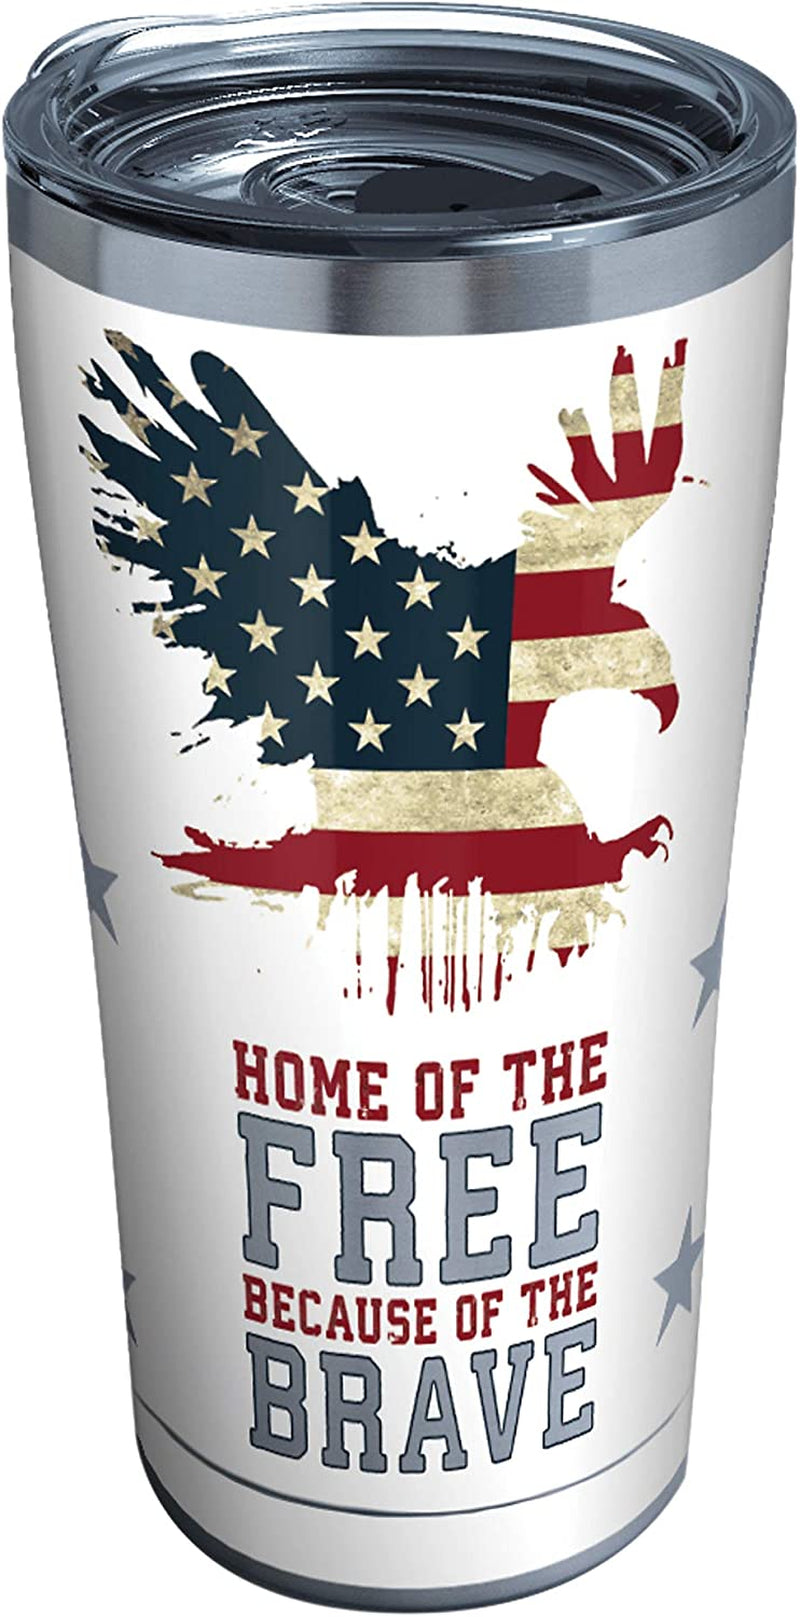 Tervis Made in USA Double Walled Home of the Free Because of the Brave Insulated Tumbler Cup Keeps Drinks Cold & Hot, 24Oz, Clear Home & Garden > Kitchen & Dining > Tableware > Drinkware Tervis Stainless Steel 20oz 